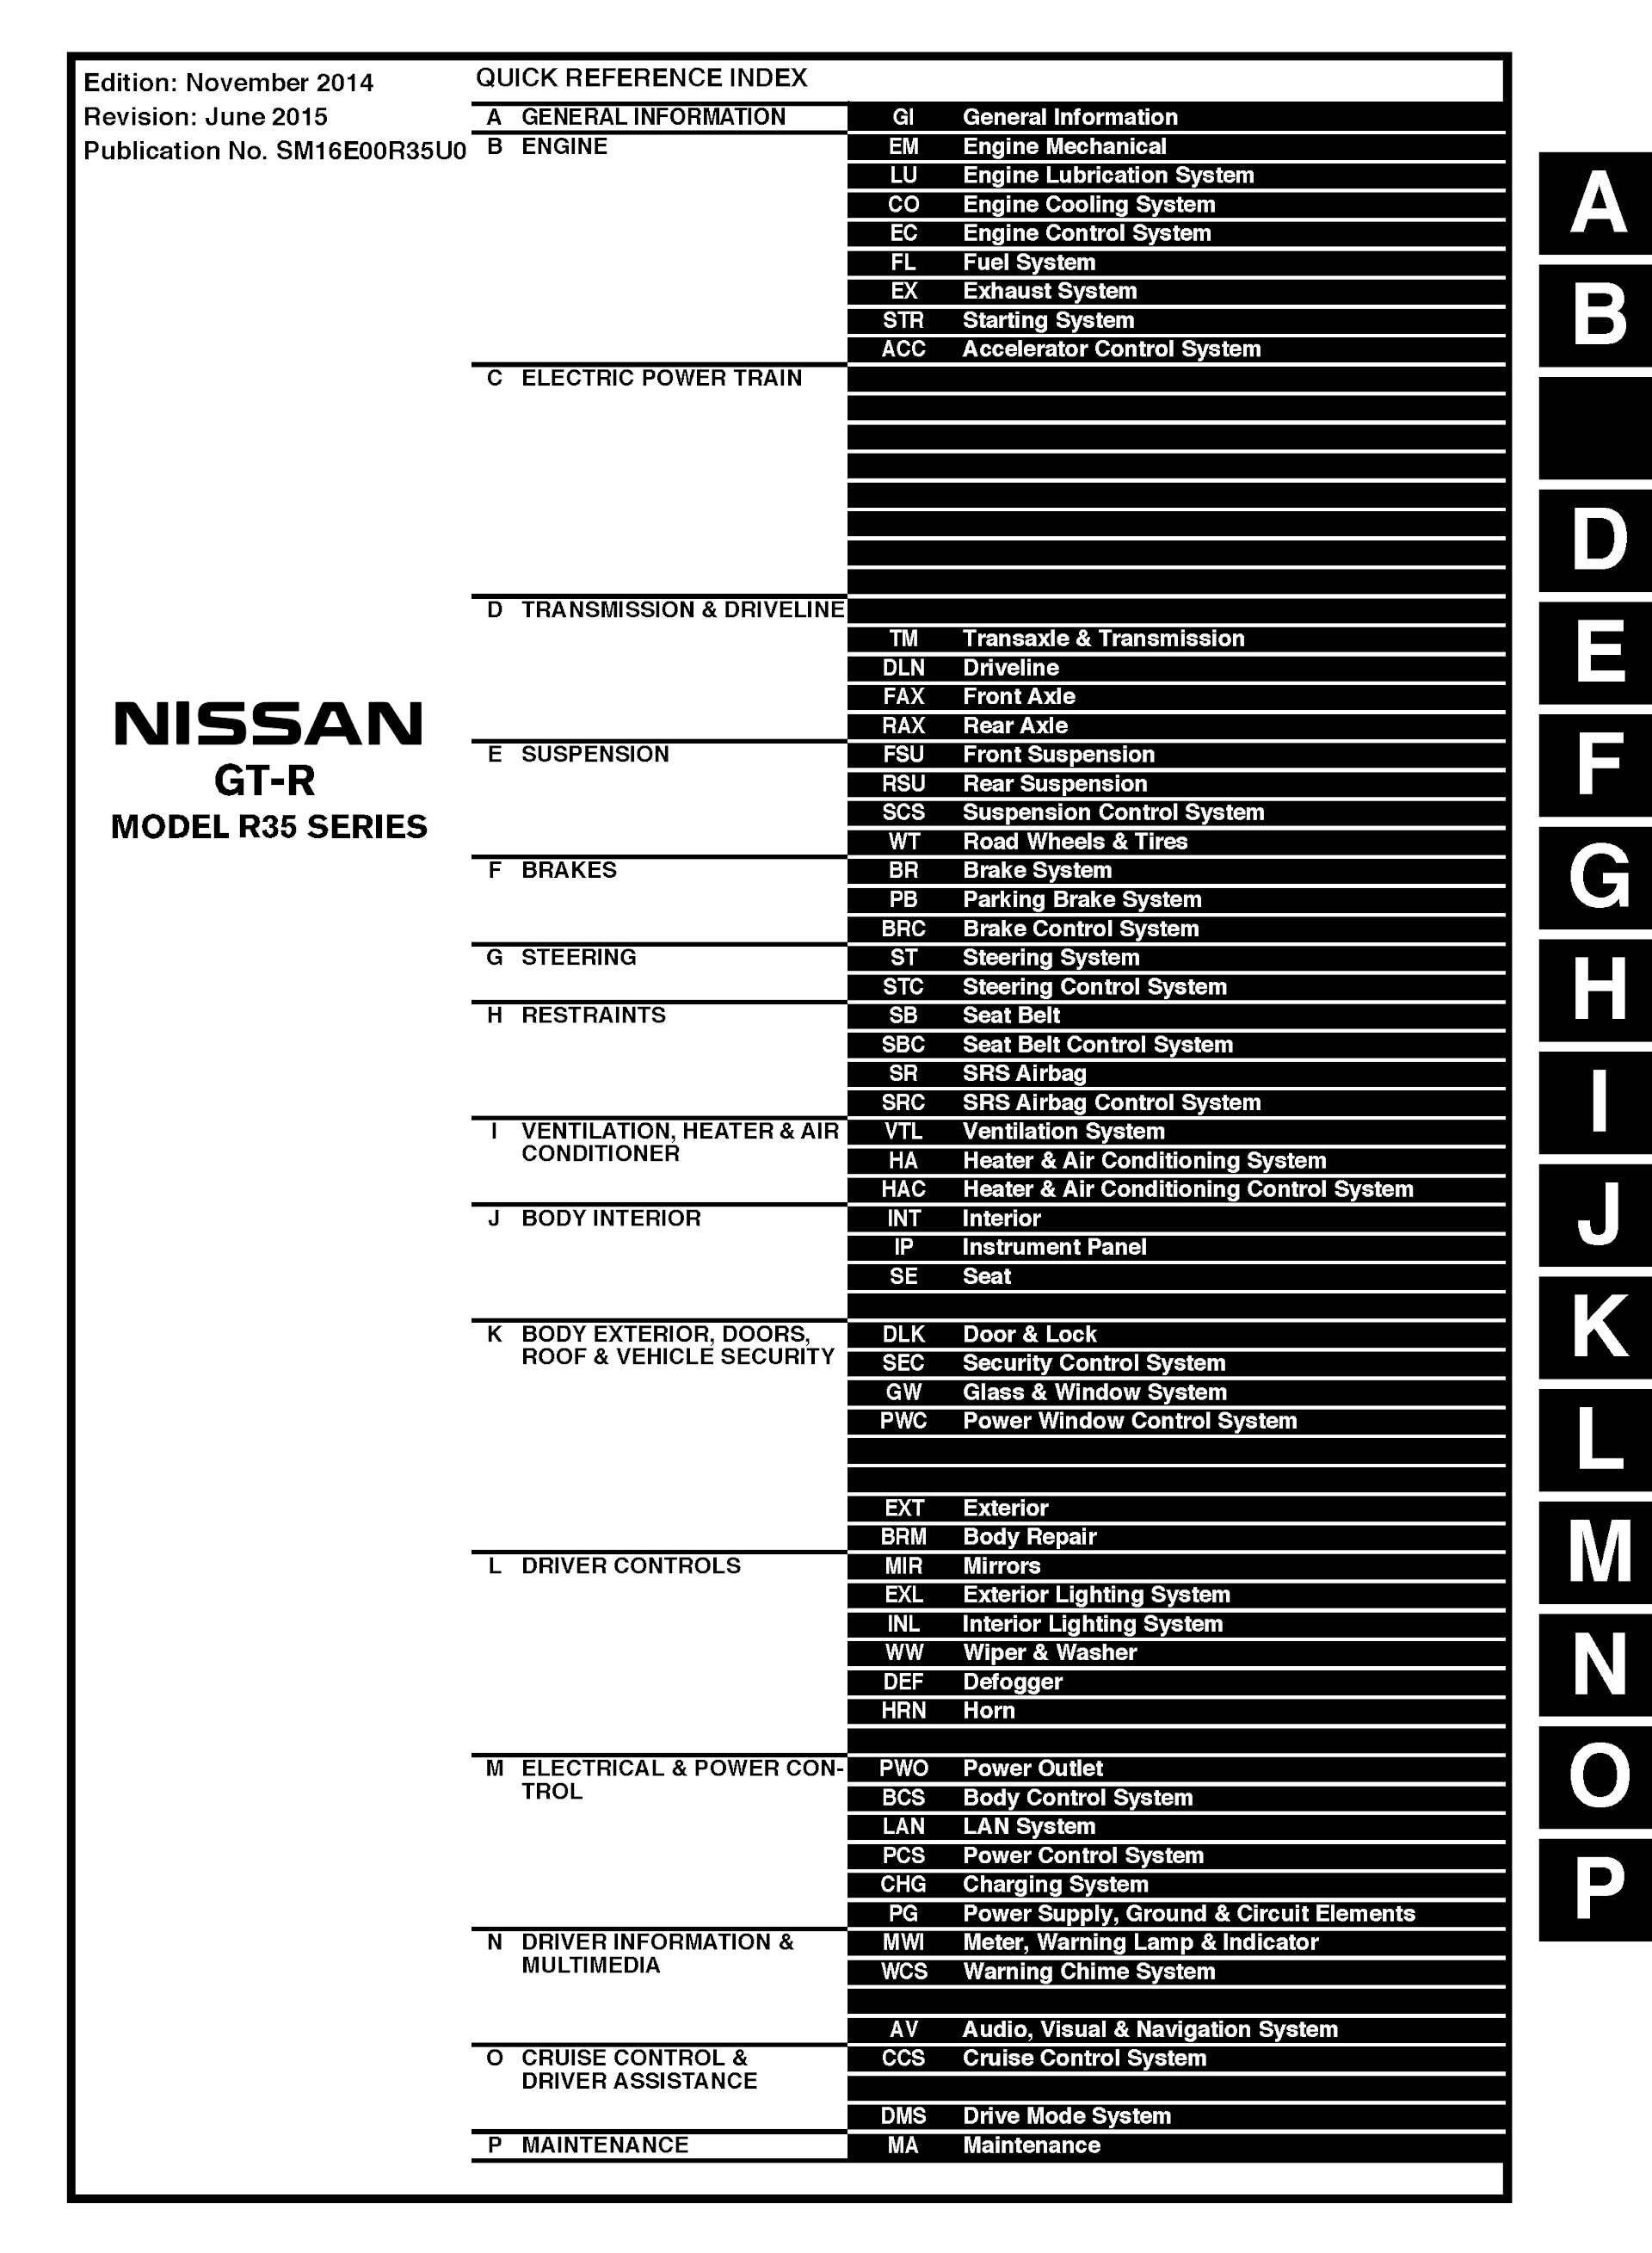 Table of Contents 2016 Nissan GT-R Repair Manual